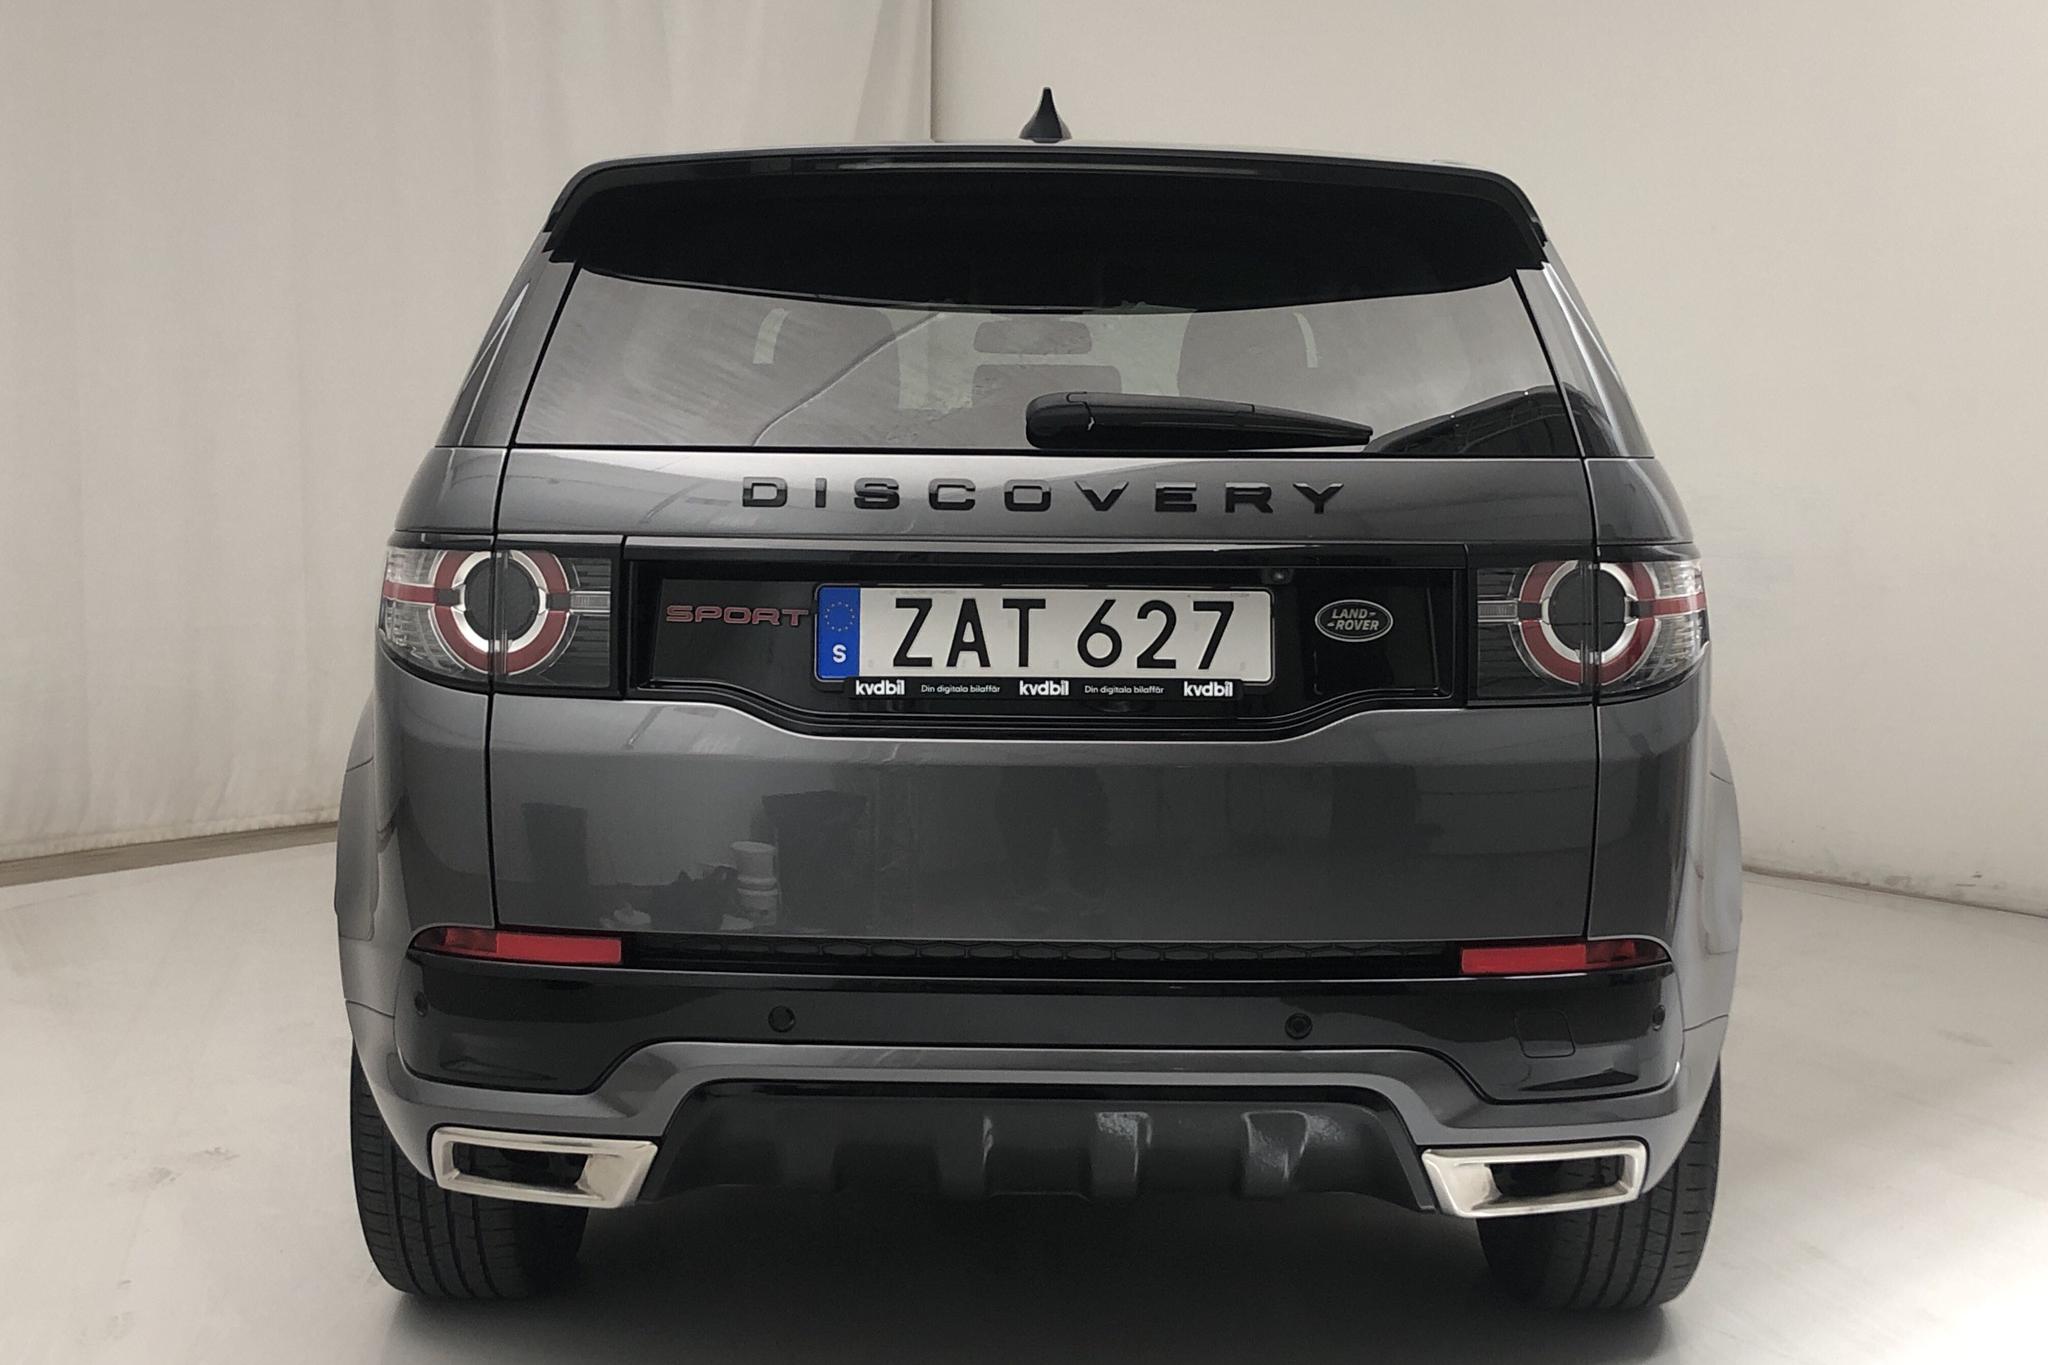 Land Rover Discovery Sport 2.0 TD4 AWD (150hk) - 61 980 km - Automatic - gray - 2018